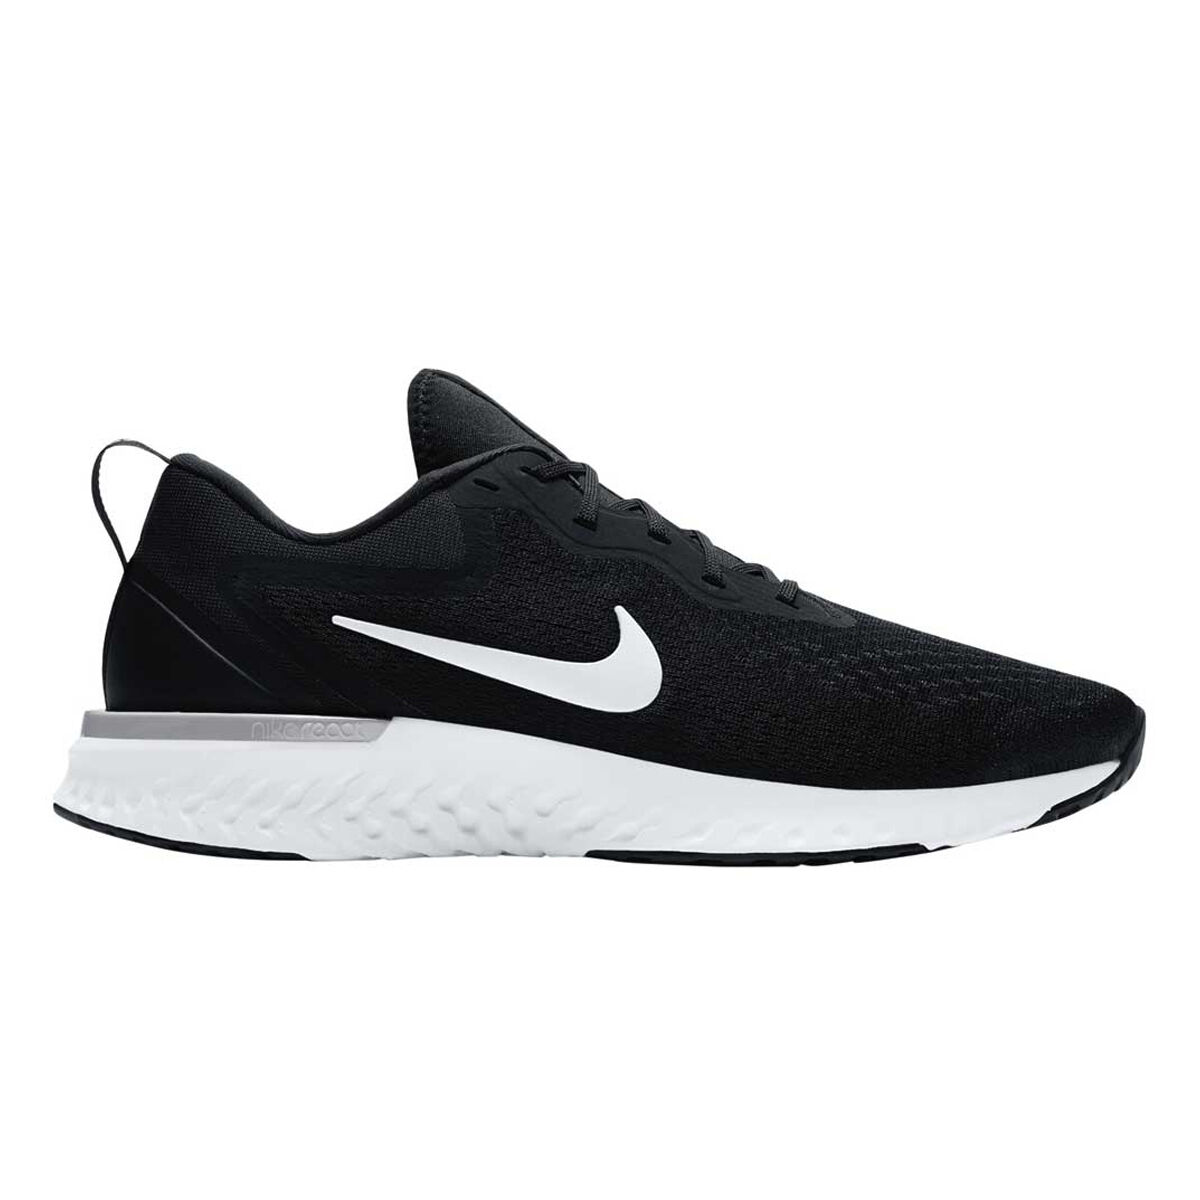 nike shoes for women black and white